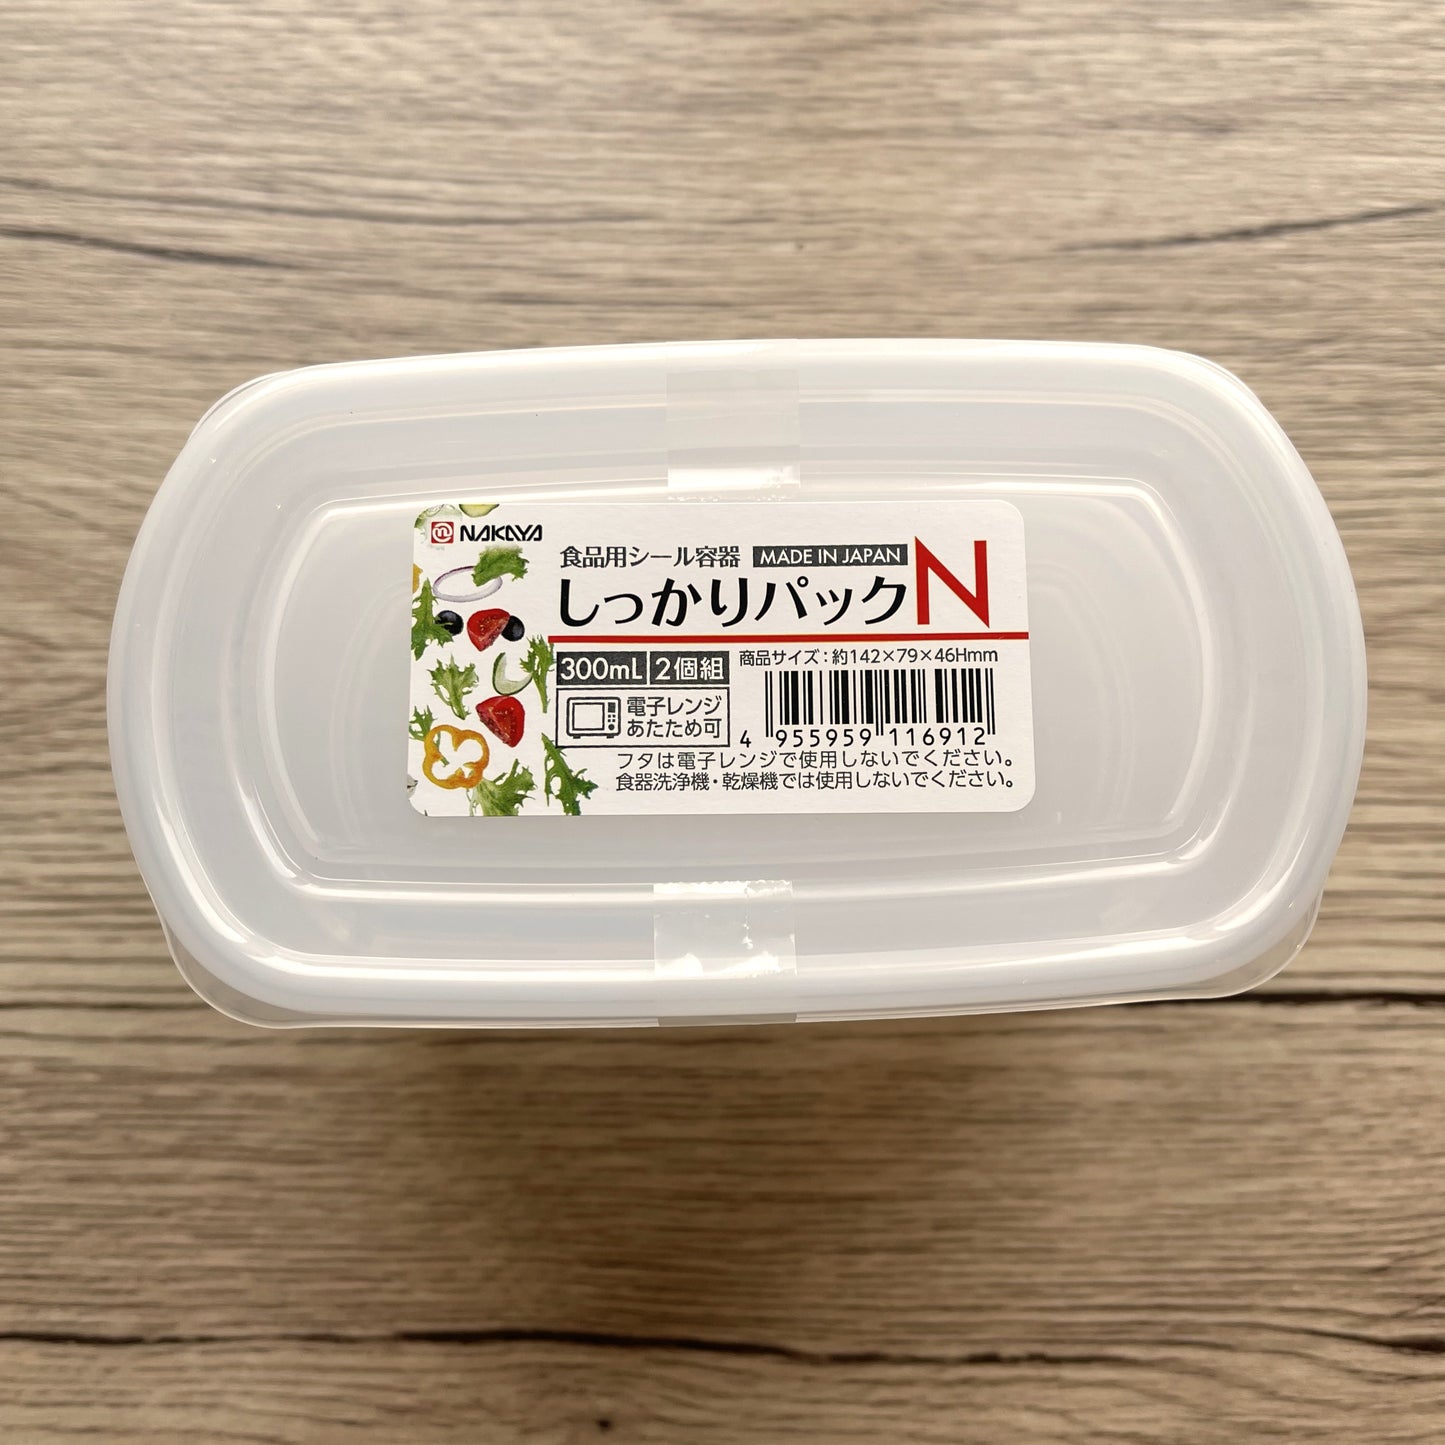 Storage Containers 300ml x 2 (Made in Japan)